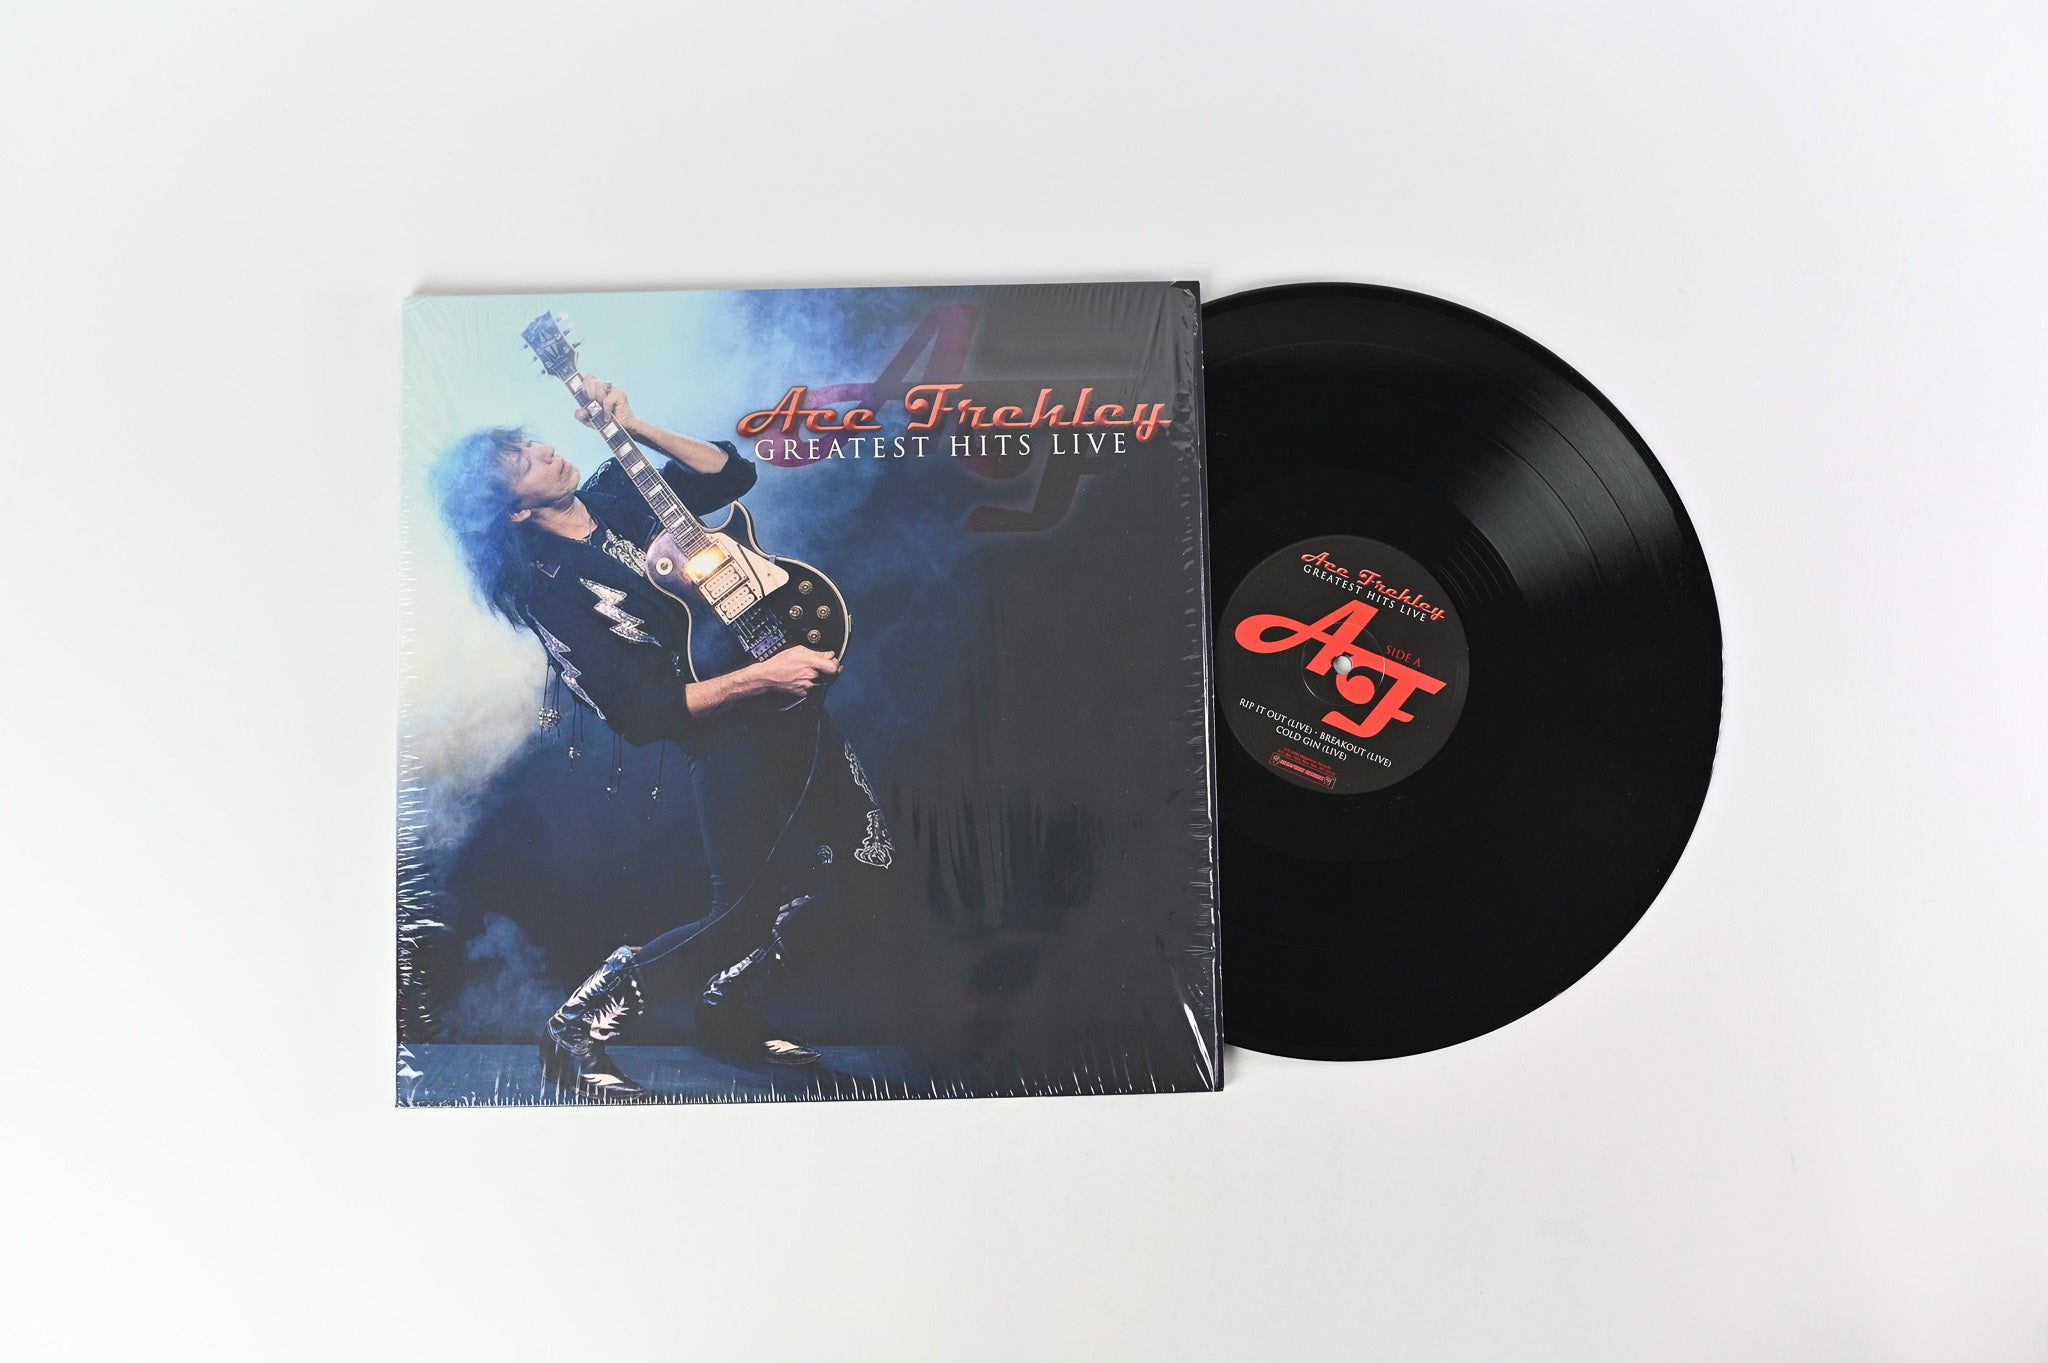 Ace Frehley - Greatest Hits Live on Megaforce Records